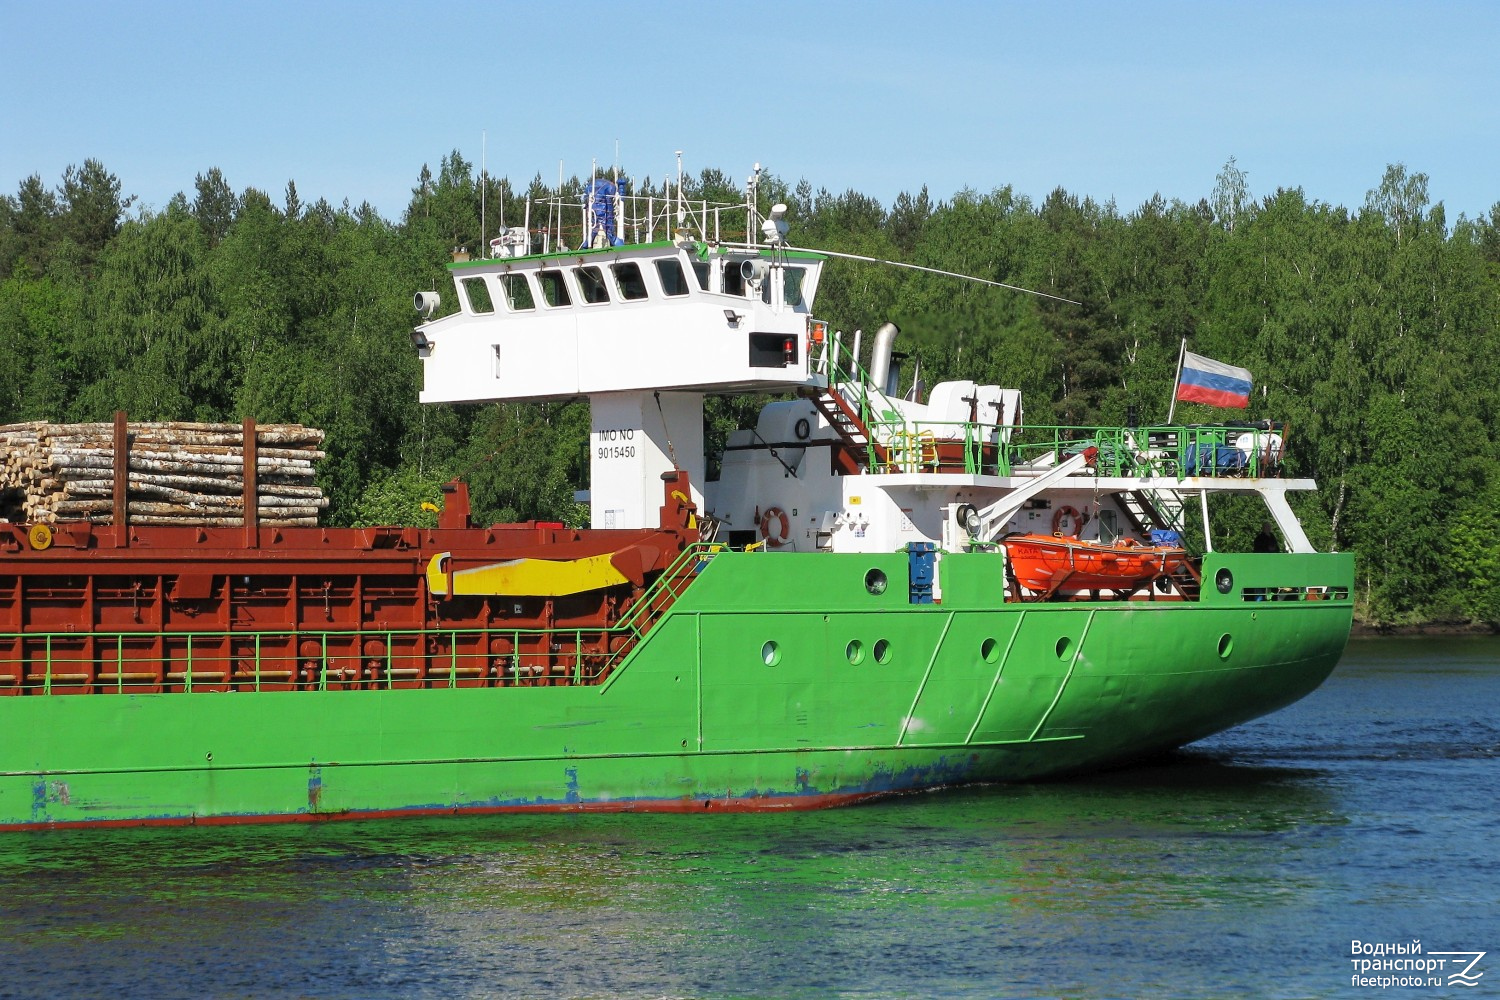 Ката. Vessel superstructures